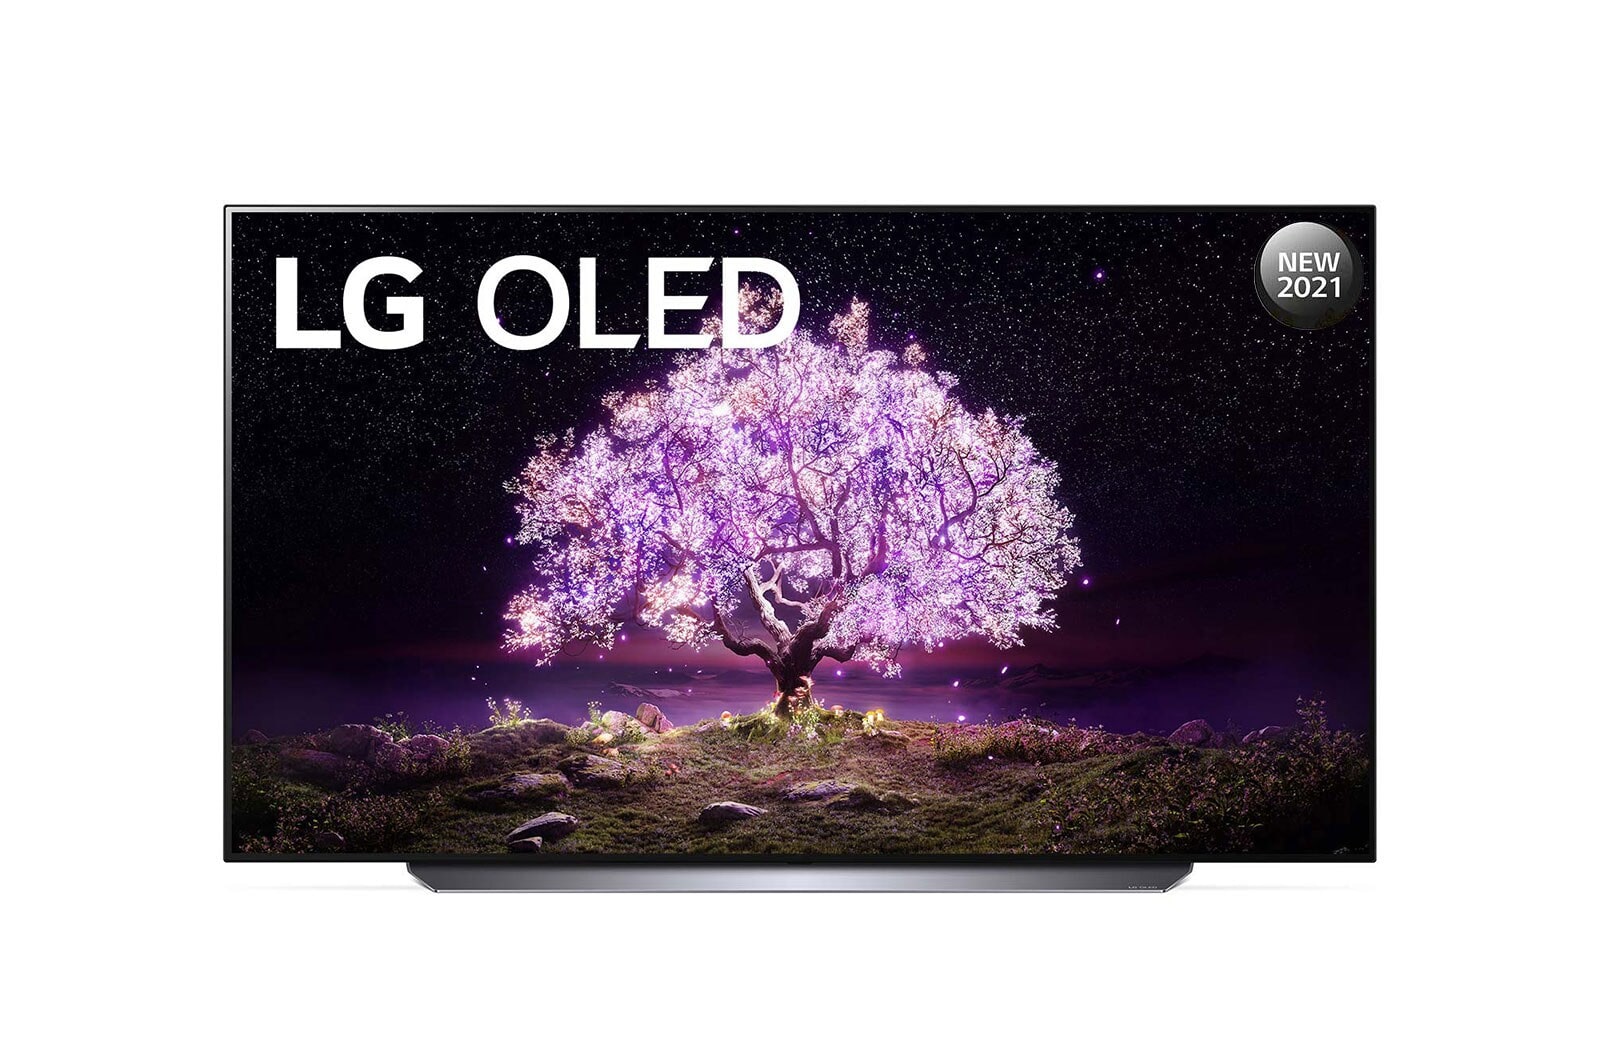 LG, OLED evo TV, 77 inch C3 series, WebOS Smart AI ThinQ, Magic Remote, 4  side cinema, Dolby Vision HDR10, HLG, AI Picture Pro, AI Sound Pro  (9.1.2ch), Dolby Atmos, 1 pole